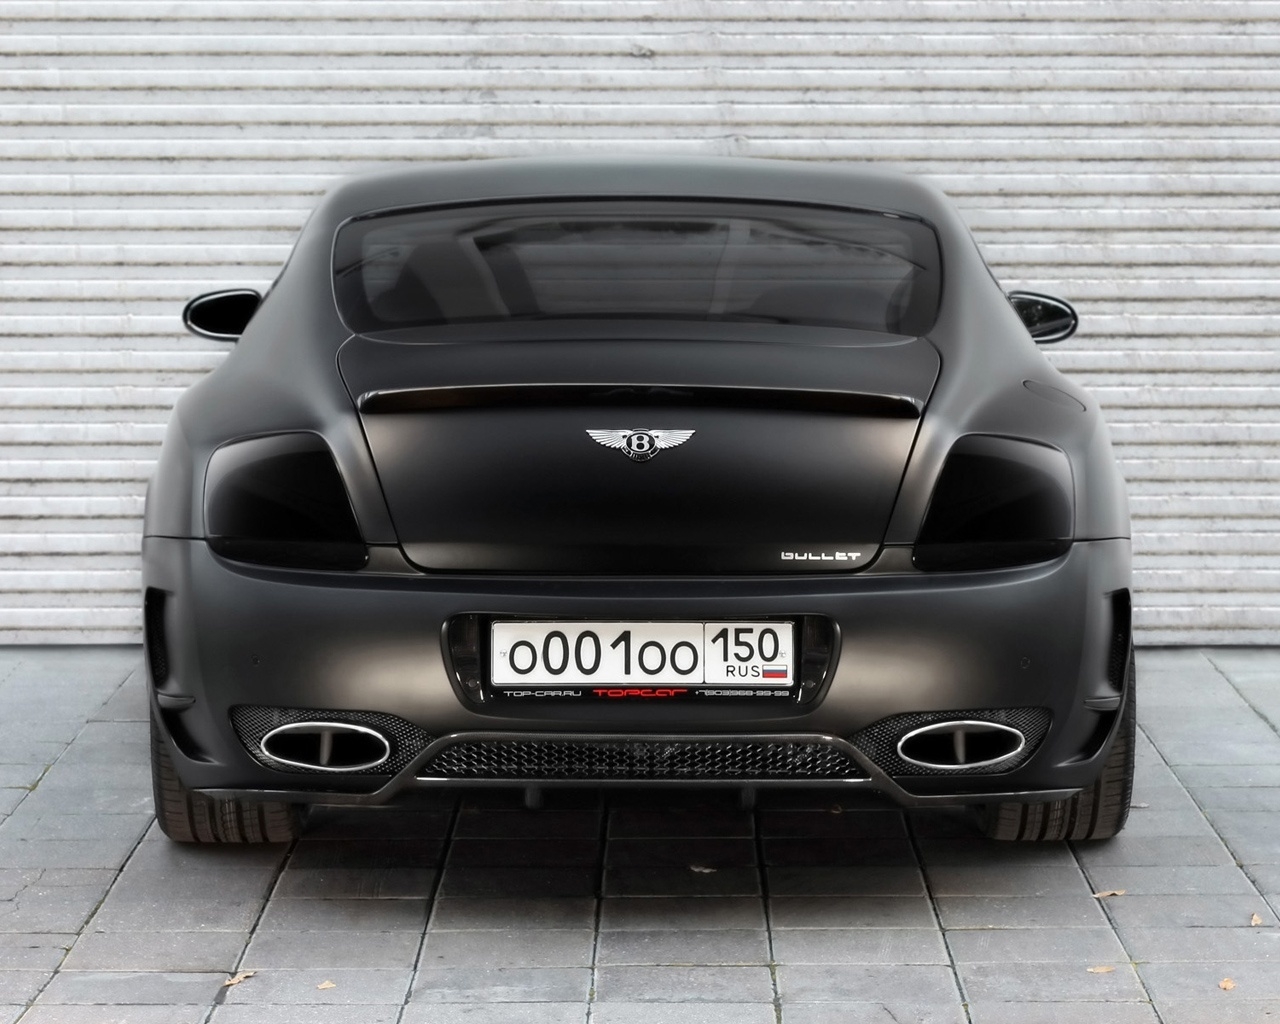 2010 Bentley Continental GT Bullet Rear for 1280 x 1024 resolution